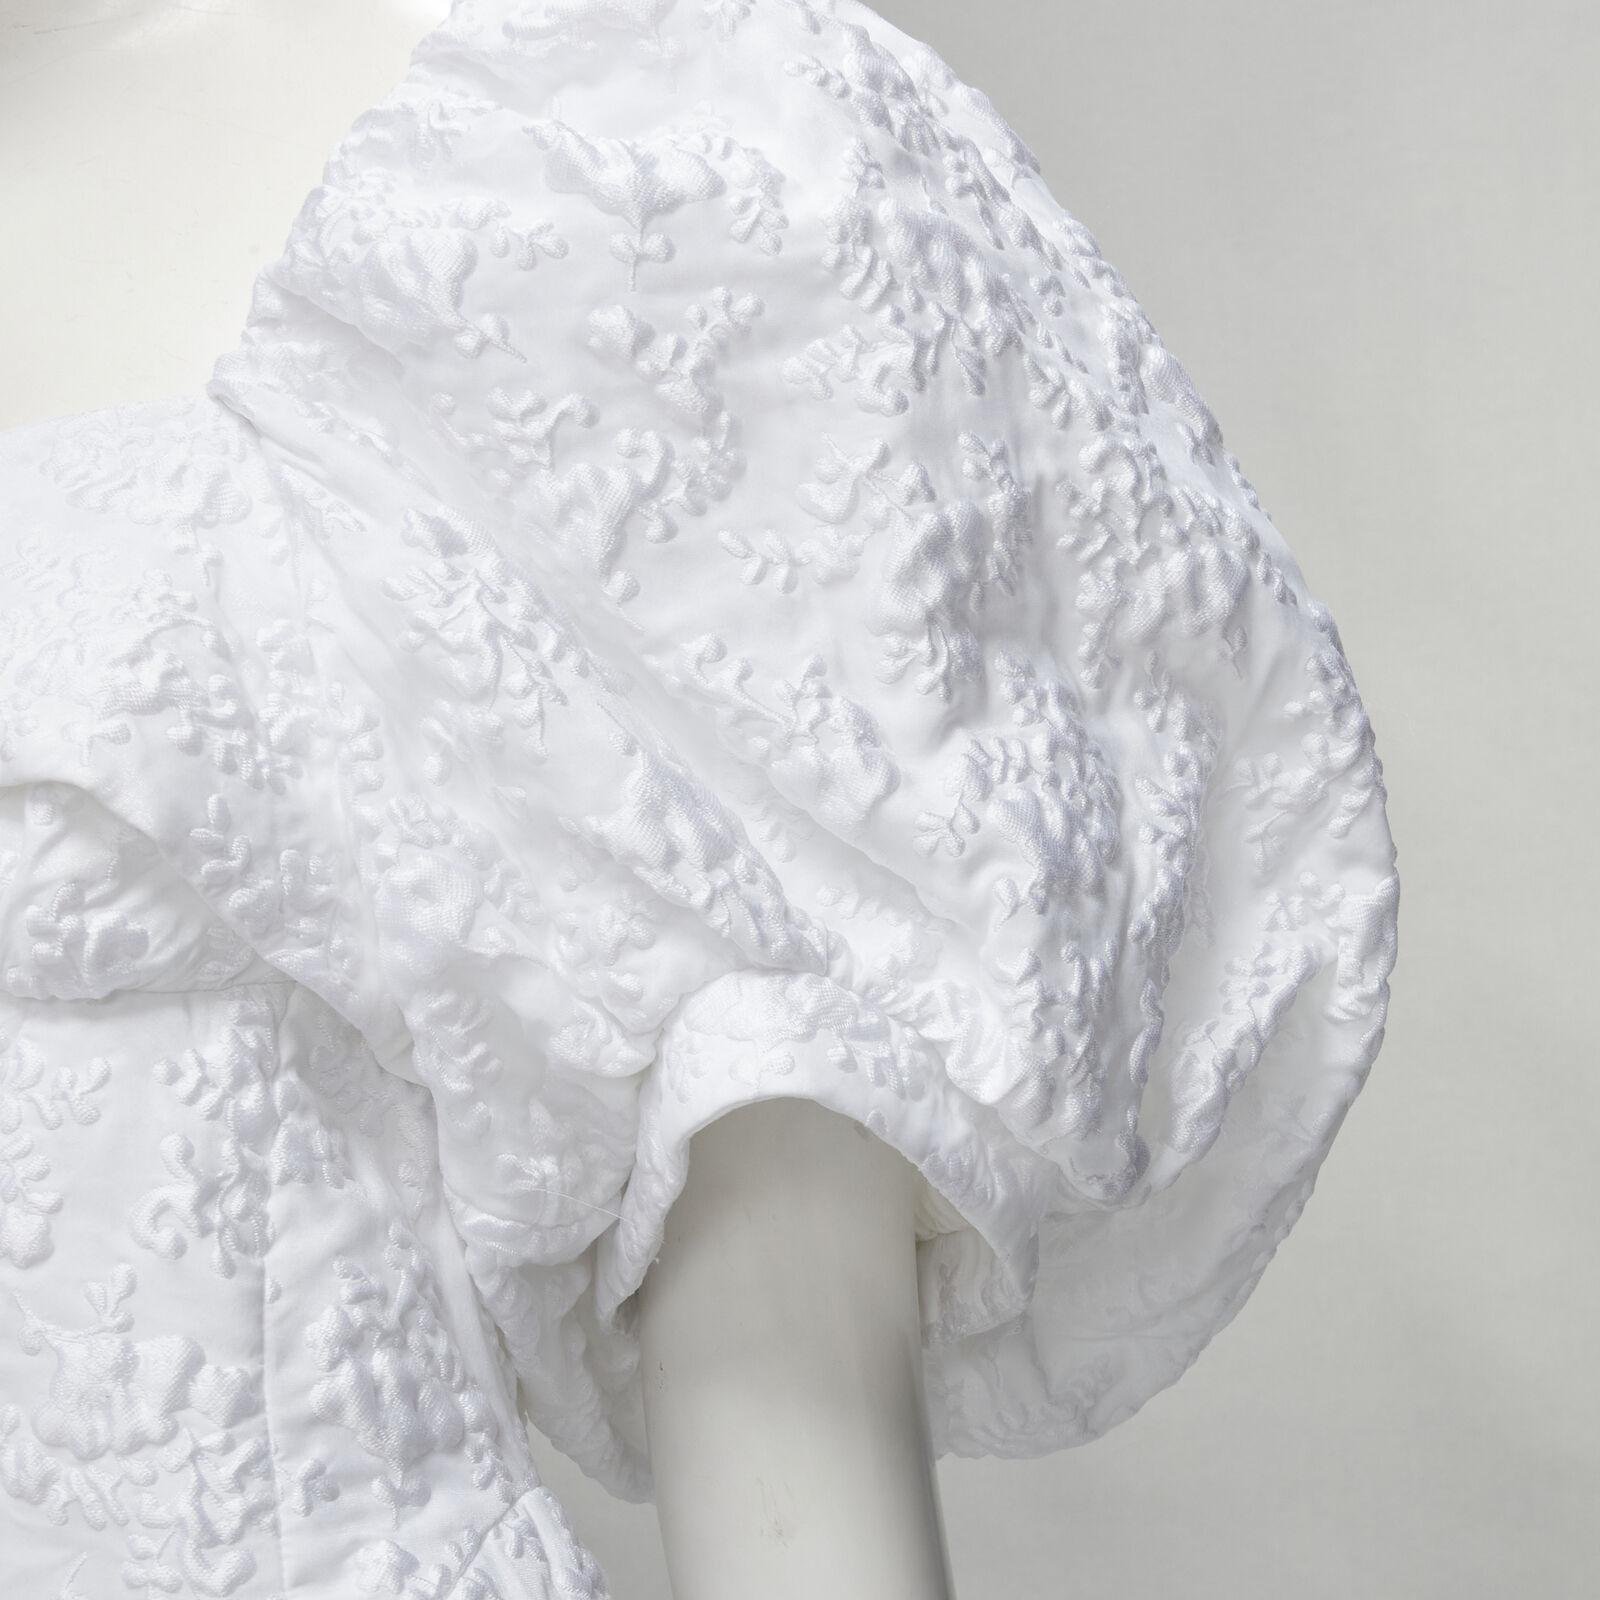 SIMONE ROCHE white floral cloque Victorian puff sleeve flared top UK6 S
Reference: KEDG/A00229
Brand: Simone Rocha
Material: Polyester, Blend
Color: White
Pattern: Solid
Closure: Zip
Lining: Acetate
Extra Details: Contoured seam for flared